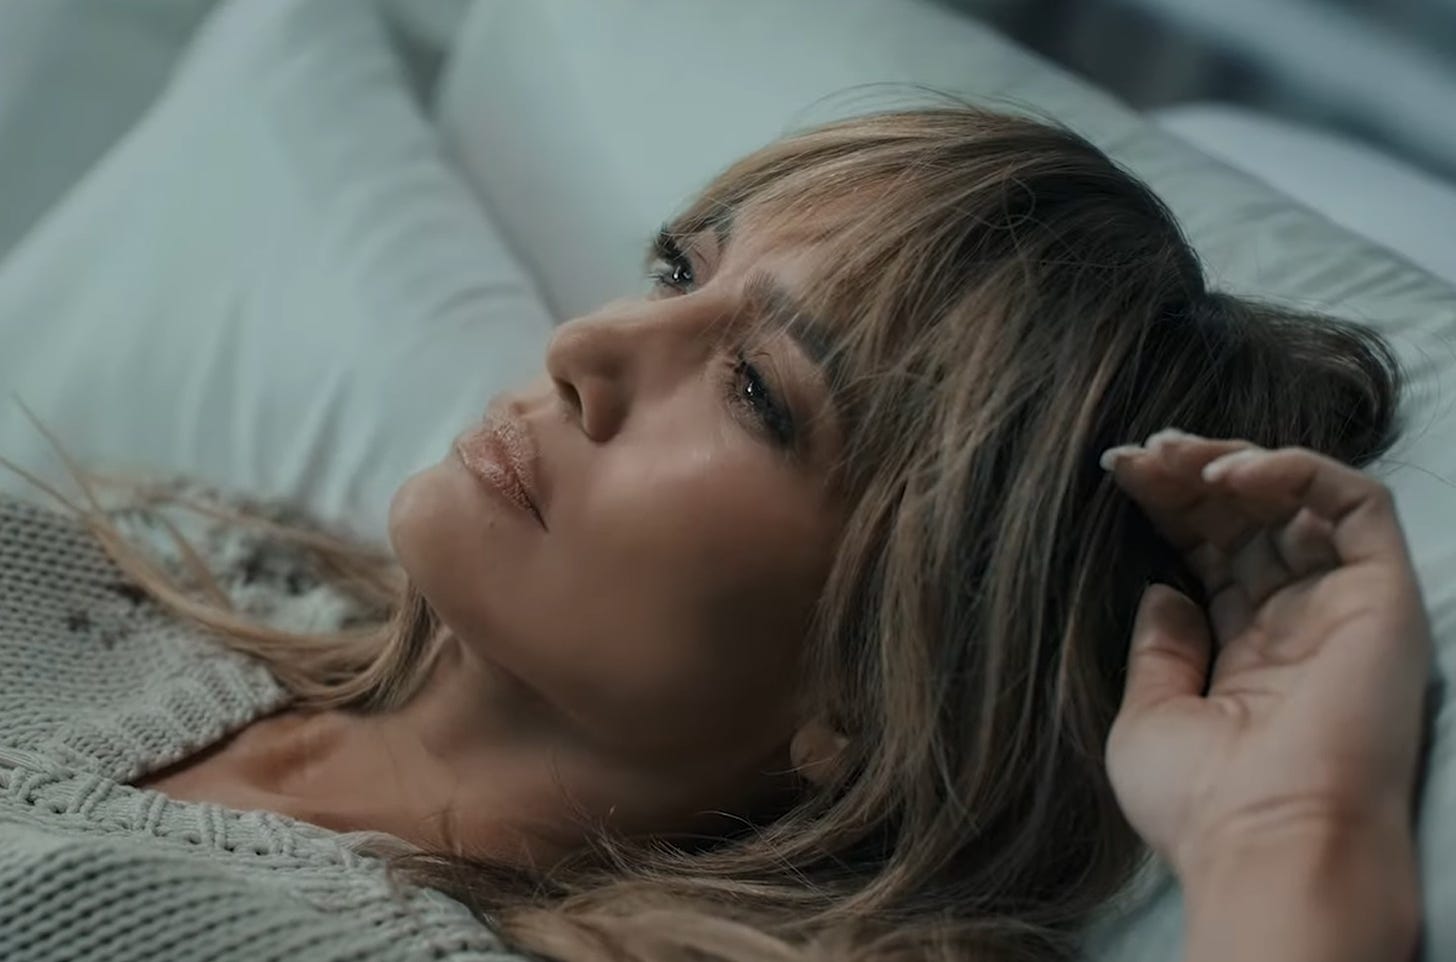 Jennifer Lopez Drops Epic Trailer For 'This Is Me... Now: A Love Story'